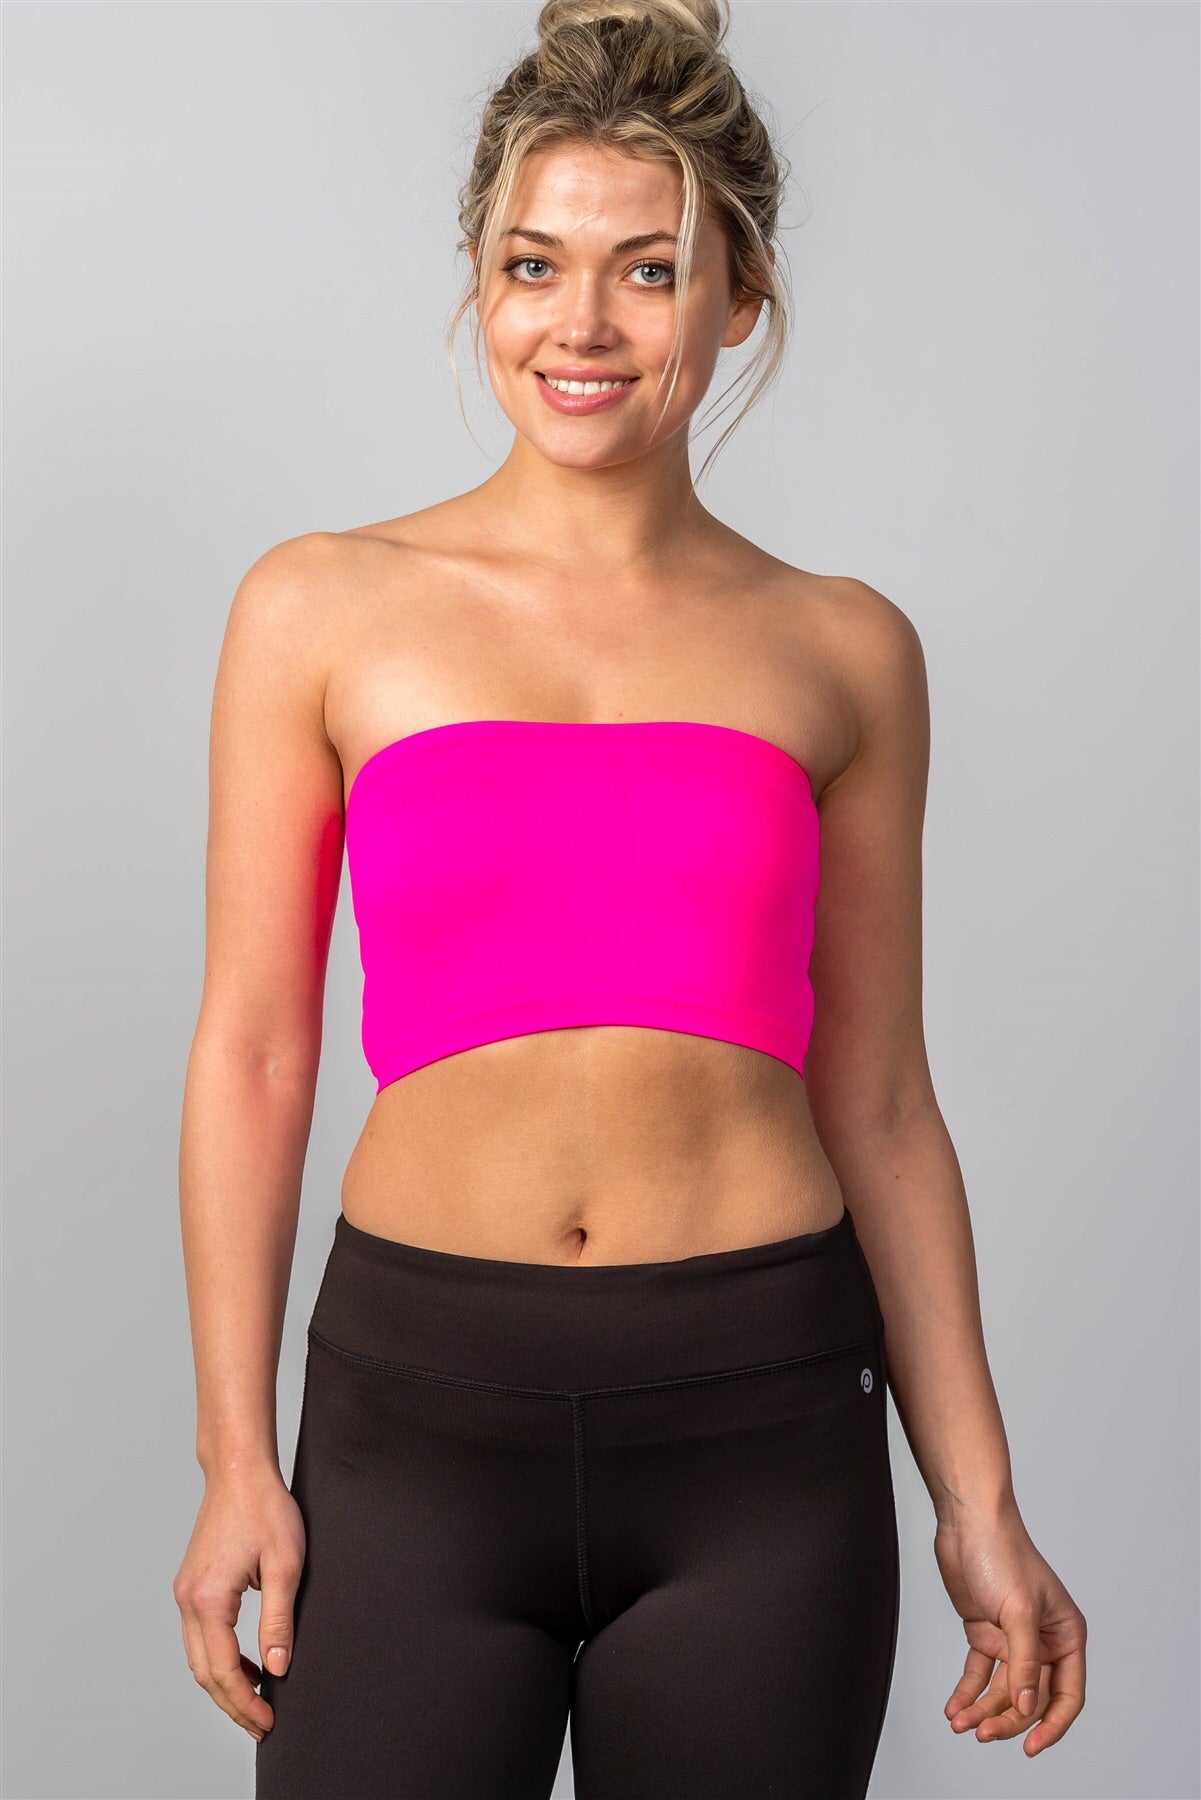 Neon Pink Classic Basic Crop Strapless Tube Top / One Size